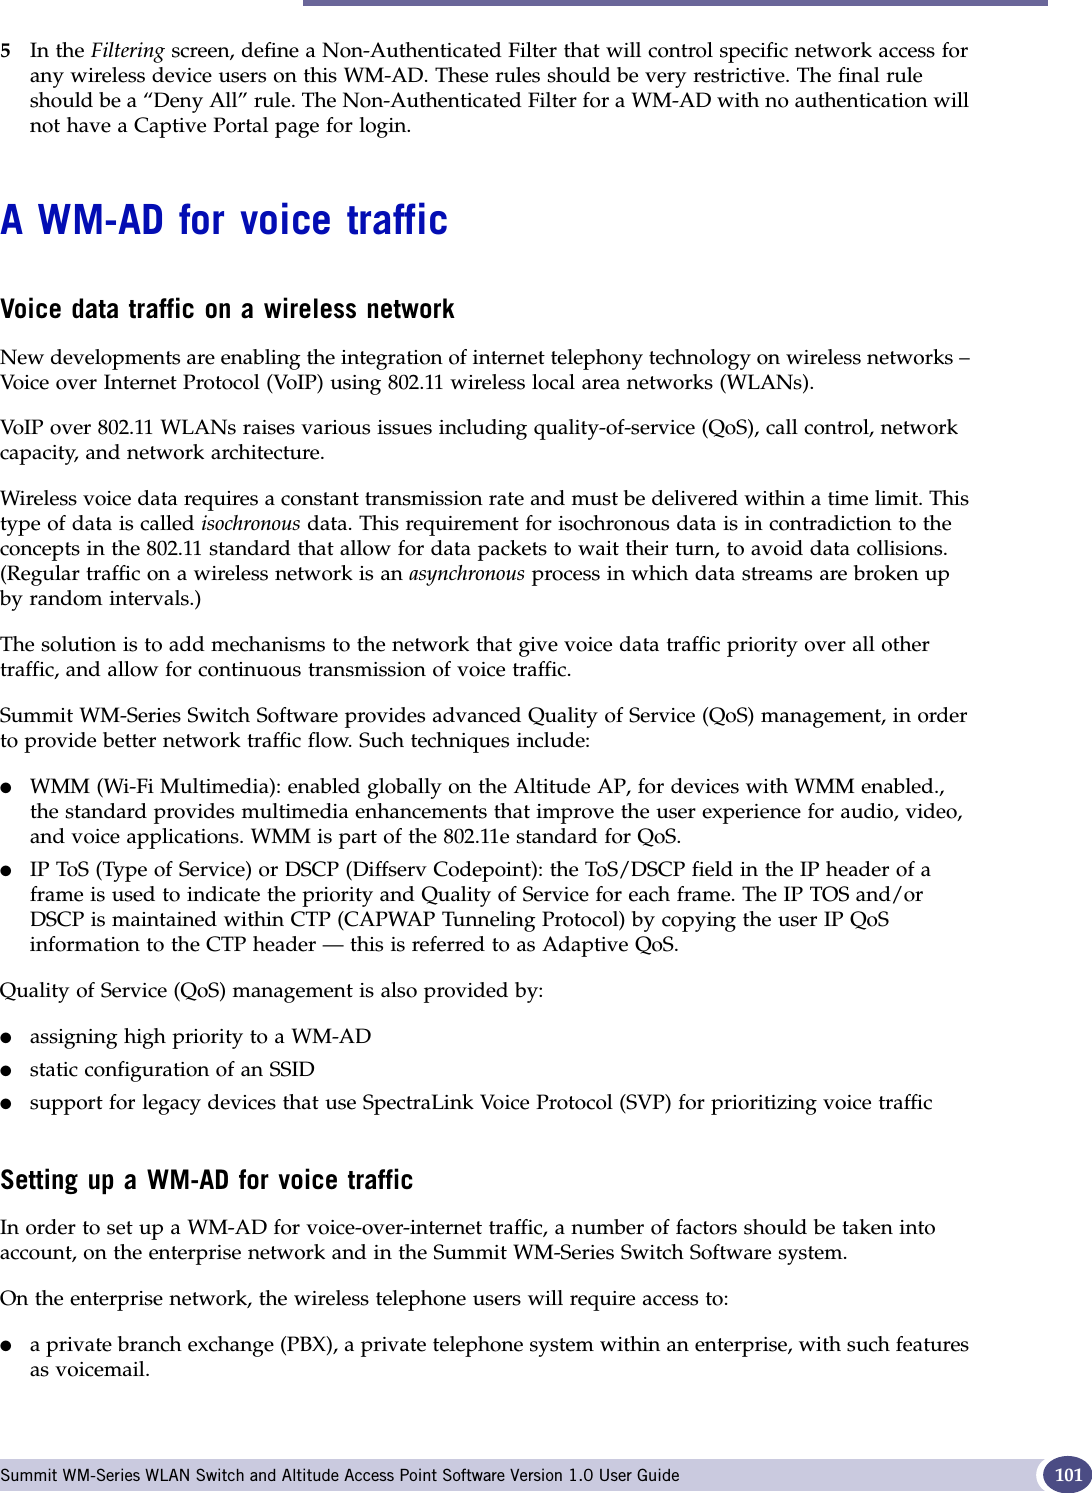 A WM-AD for voice traffic Summit WM-Series WLAN Switch and Altitude Access Point Software Version 1.0 User Guide 1015In the Filtering screen, define a Non-Authenticated Filter that will control specific network access for any wireless device users on this WM-AD. These rules should be very restrictive. The final rule should be a “Deny All” rule. The Non-Authenticated Filter for a WM-AD with no authentication will not have a Captive Portal page for login.A WM-AD for voice trafficVoice data traffic on a wireless networkNew developments are enabling the integration of internet telephony technology on wireless networks – Voice over Internet Protocol (VoIP) using 802.11 wireless local area networks (WLANs). VoIP over 802.11 WLANs raises various issues including quality-of-service (QoS), call control, network capacity, and network architecture.Wireless voice data requires a constant transmission rate and must be delivered within a time limit. This type of data is called isochronous data. This requirement for isochronous data is in contradiction to the concepts in the 802.11 standard that allow for data packets to wait their turn, to avoid data collisions. (Regular traffic on a wireless network is an asynchronous process in which data streams are broken up by random intervals.)The solution is to add mechanisms to the network that give voice data traffic priority over all other traffic, and allow for continuous transmission of voice traffic.Summit WM-Series Switch Software provides advanced Quality of Service (QoS) management, in order to provide better network traffic flow. Such techniques include:●WMM (Wi-Fi Multimedia): enabled globally on the Altitude AP, for devices with WMM enabled., the standard provides multimedia enhancements that improve the user experience for audio, video, and voice applications. WMM is part of the 802.11e standard for QoS.●IP ToS (Type of Service) or DSCP (Diffserv Codepoint): the ToS/DSCP field in the IP header of a frame is used to indicate the priority and Quality of Service for each frame. The IP TOS and/or DSCP is maintained within CTP (CAPWAP Tunneling Protocol) by copying the user IP QoS information to the CTP header — this is referred to as Adaptive QoS. Quality of Service (QoS) management is also provided by:●assigning high priority to a WM-AD●static configuration of an SSID●support for legacy devices that use SpectraLink Voice Protocol (SVP) for prioritizing voice trafficSetting up a WM-AD for voice trafficIn order to set up a WM-AD for voice-over-internet traffic, a number of factors should be taken into account, on the enterprise network and in the Summit WM-Series Switch Software system.On the enterprise network, the wireless telephone users will require access to:●a private branch exchange (PBX), a private telephone system within an enterprise, with such features as voicemail. 